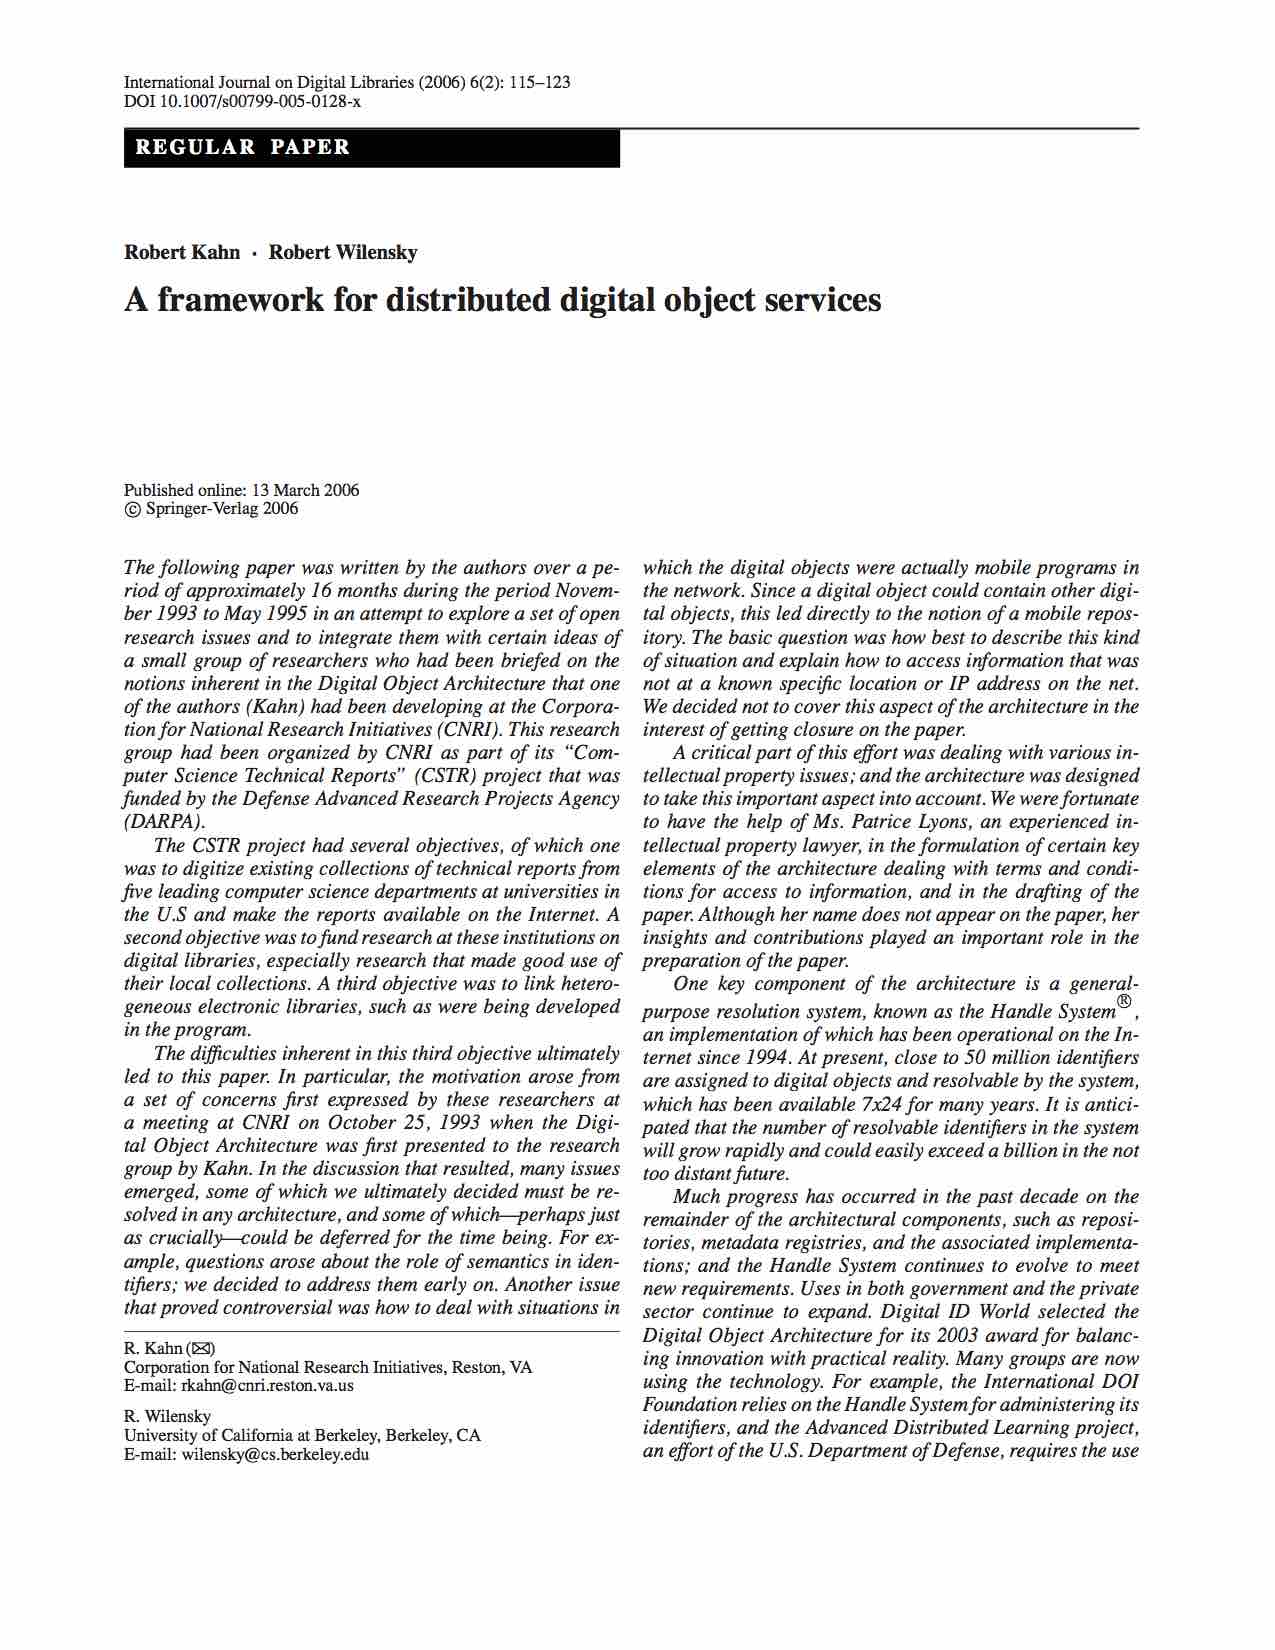 A Framework for Distributed Digital Object Services